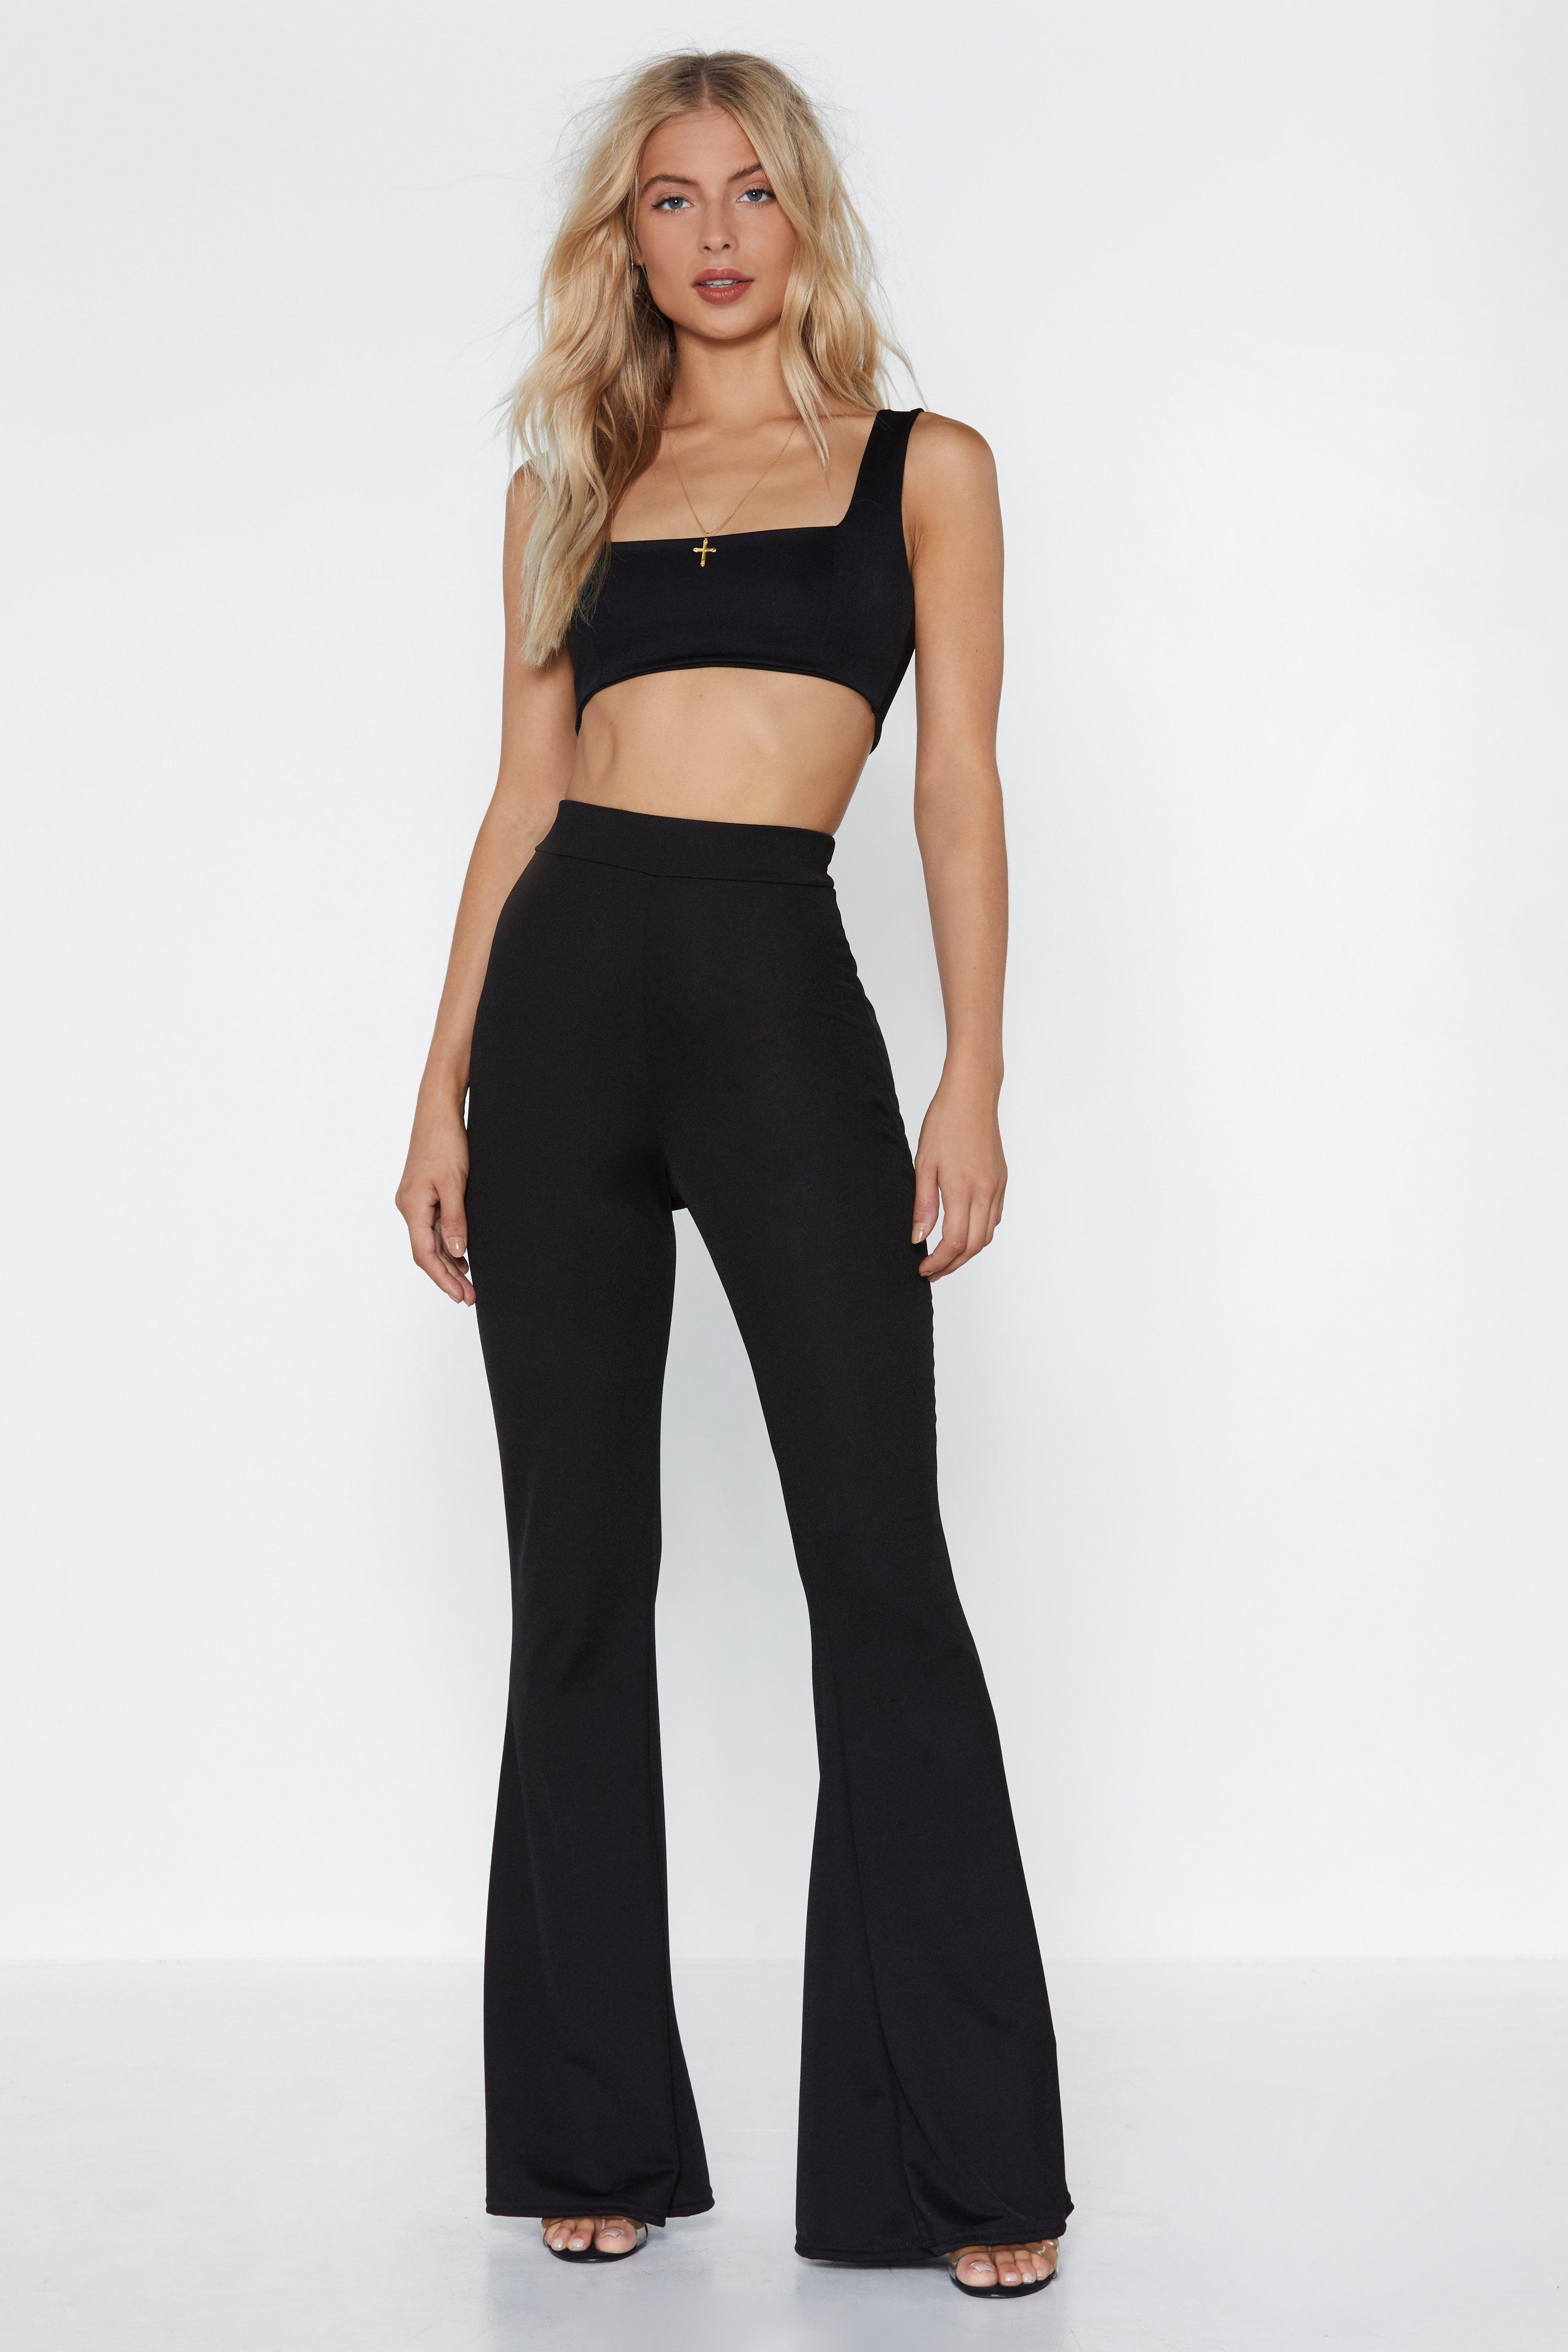 flare pants with crop top